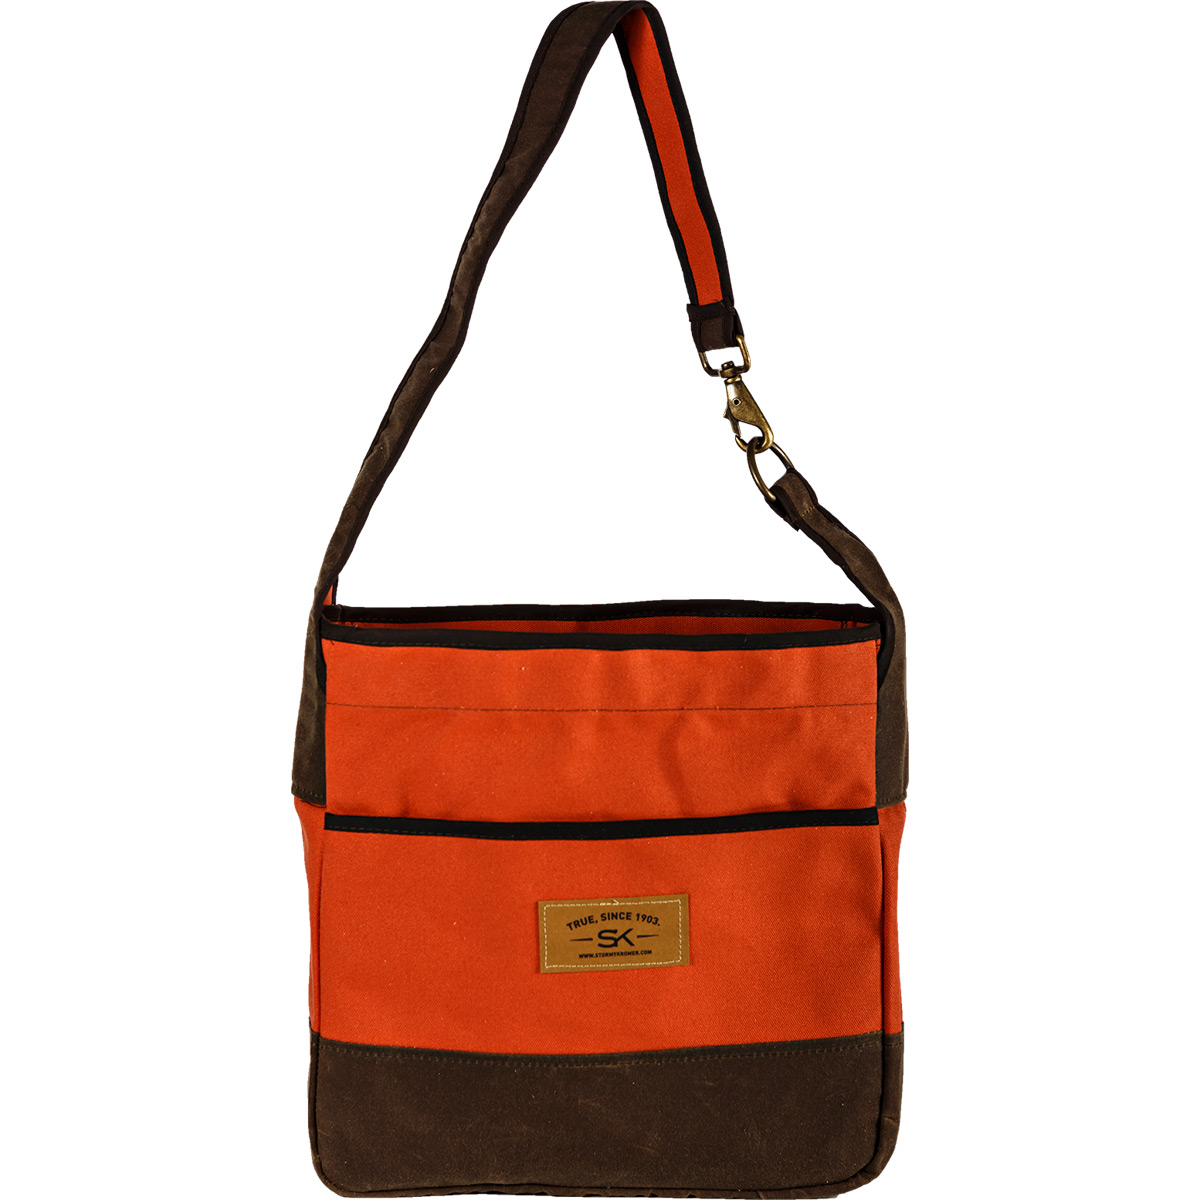 Stormy Kromer The Kromer Tote Discontinued Pricing